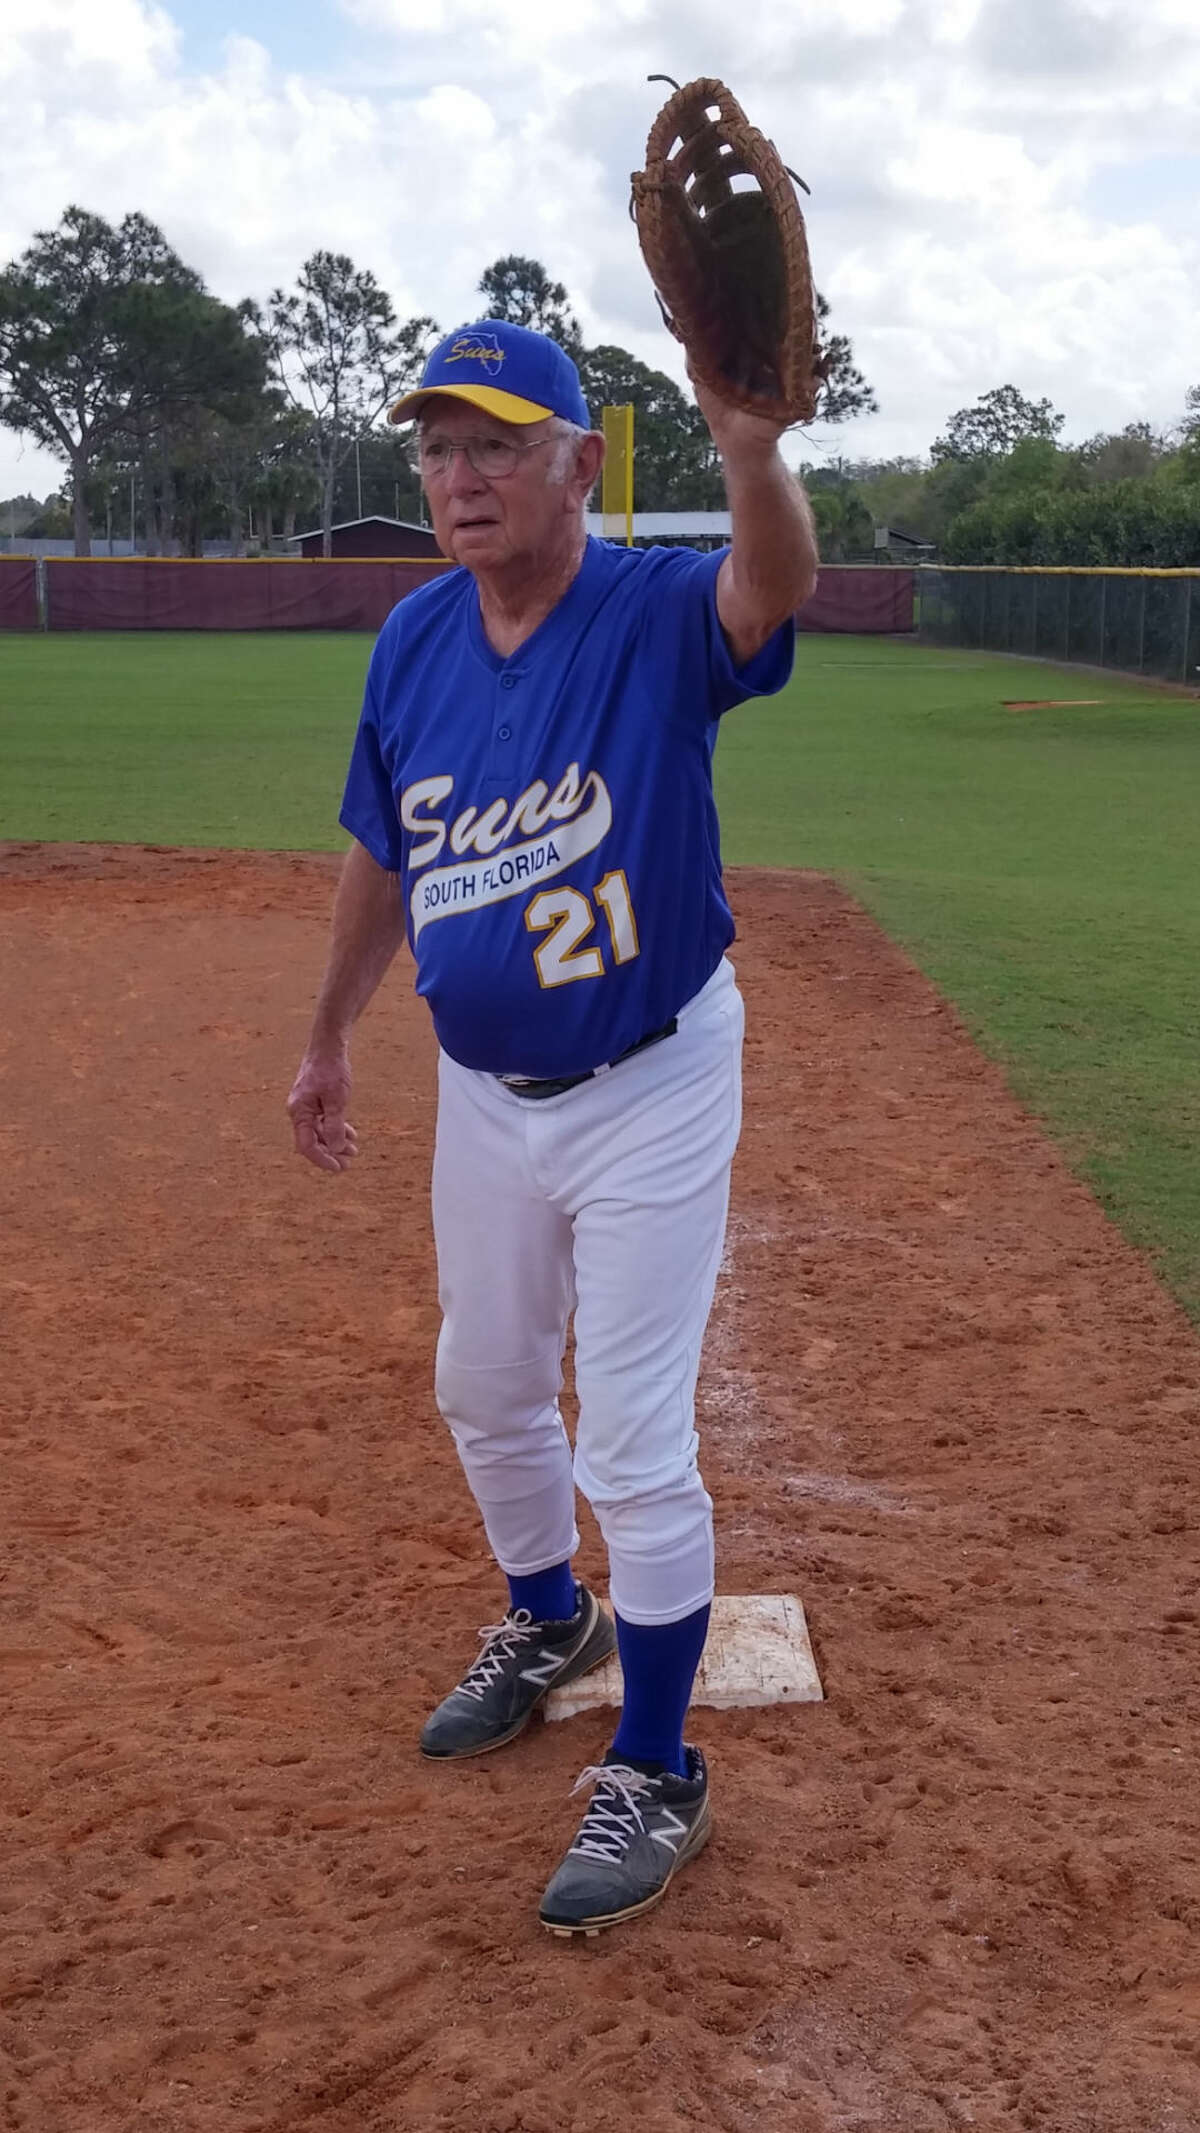 Norwalk native and former City League player Dave Power, a few weeks shy of his 77th birthday, has played baseball for 62 consecutive years. (Contributed Photo)